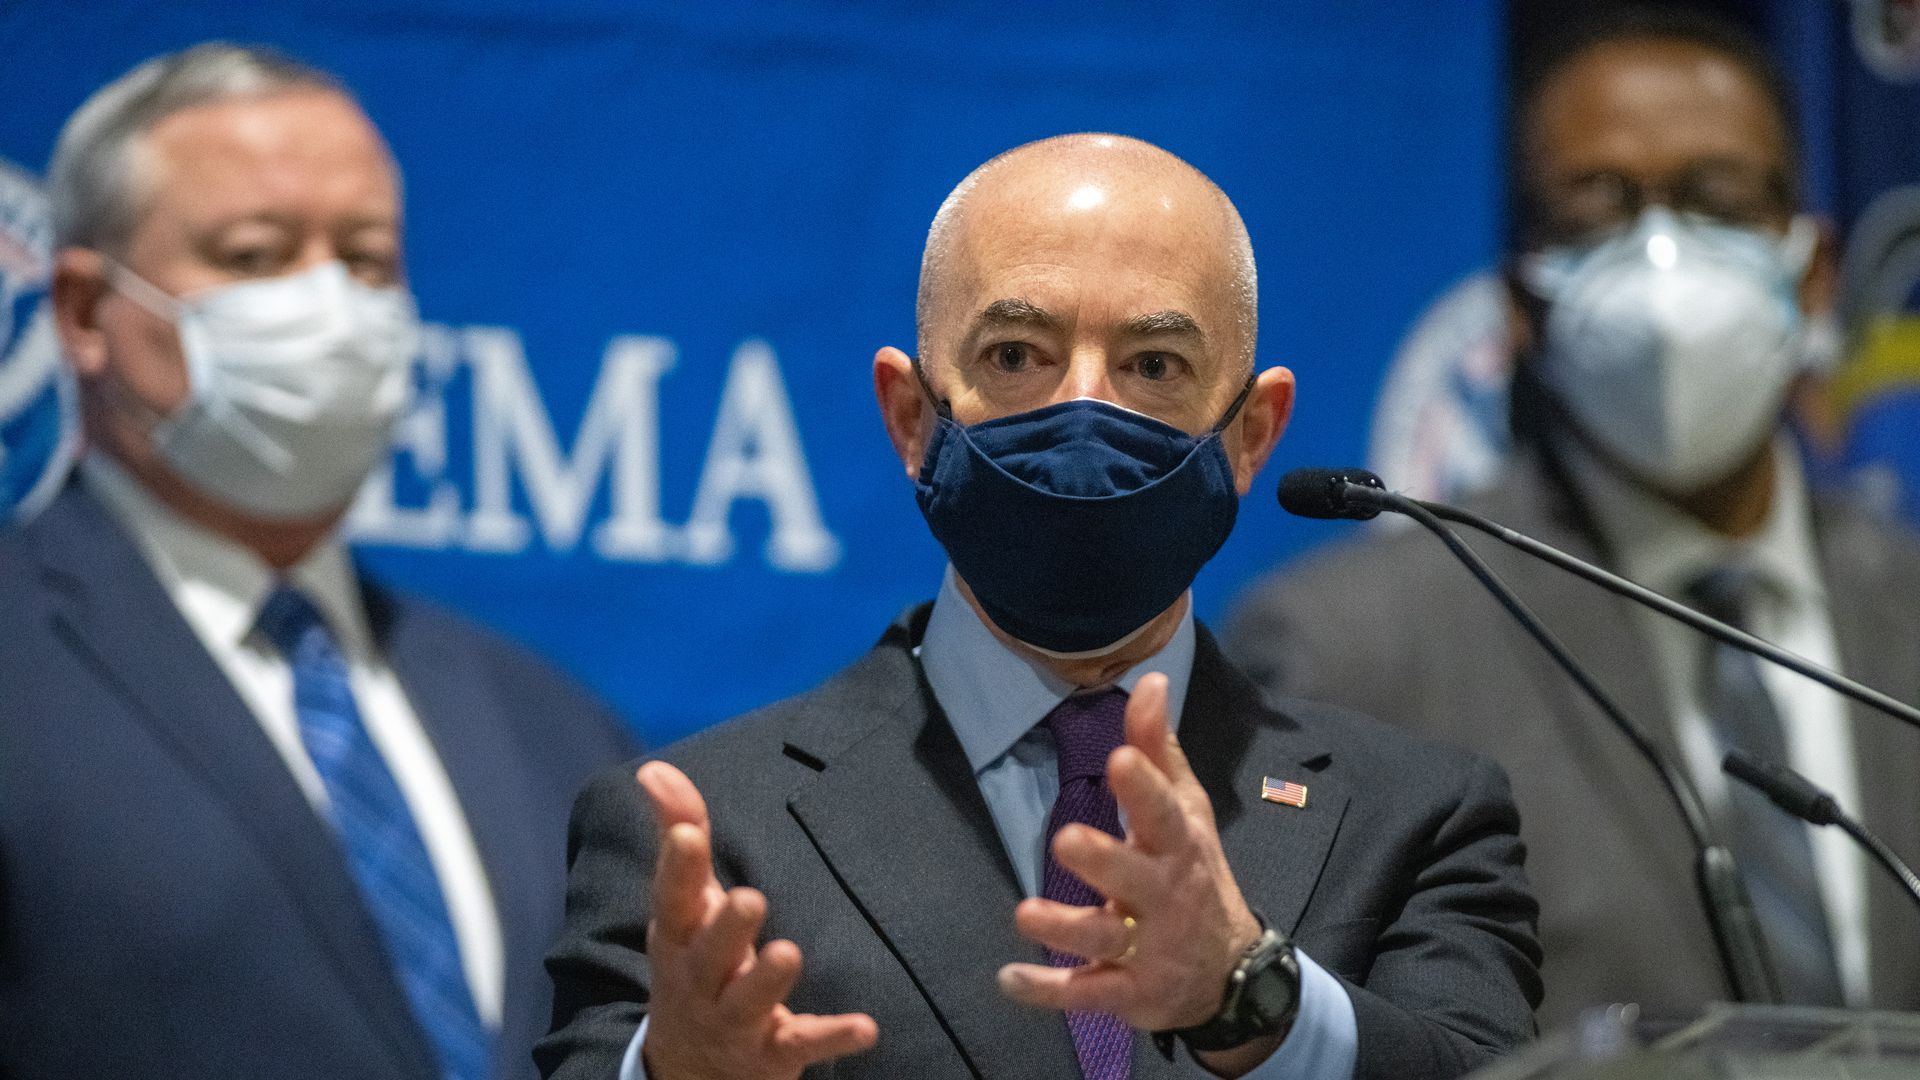 Secretary of Homeland Security Alejandro Mayorkas delivers remarks while visiting a FEMA community vaccination center on March 2, 2021 in Philadelphia, Pennsylvania.